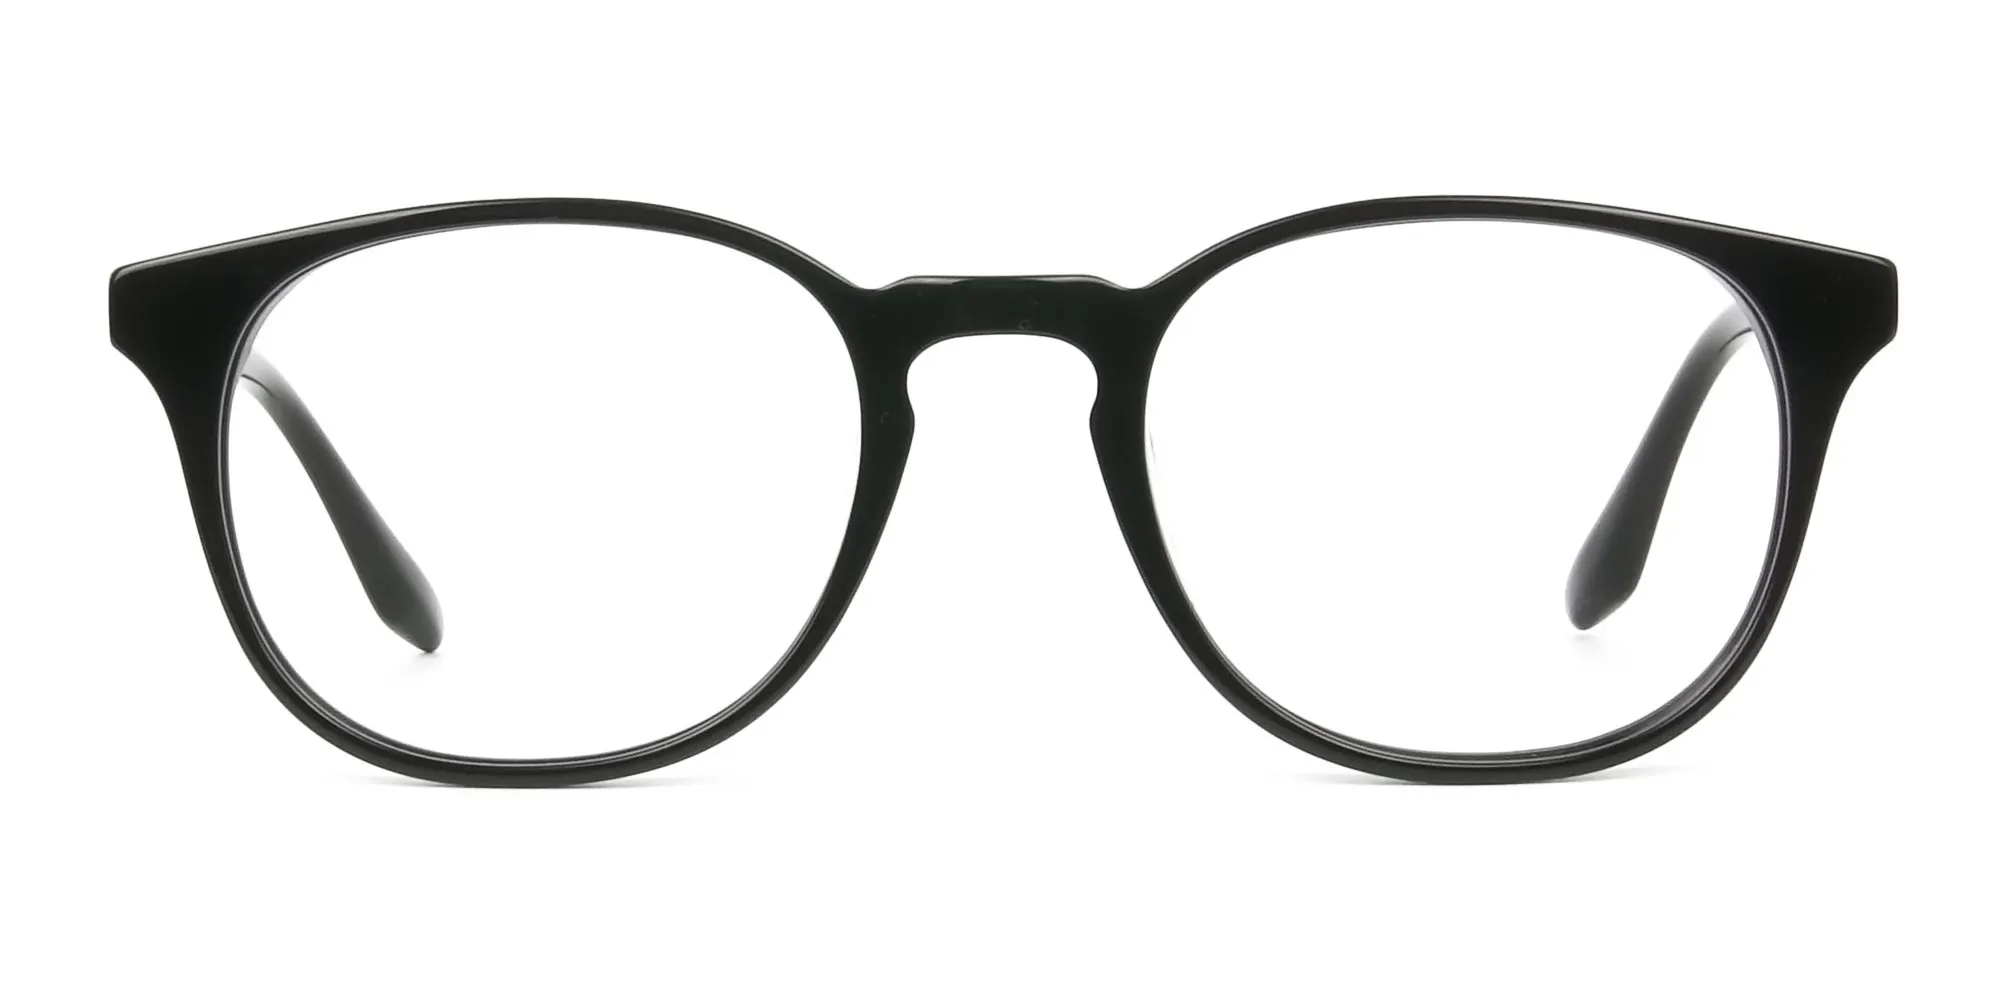 Black Square Style Glasses in Thin Frame - 2